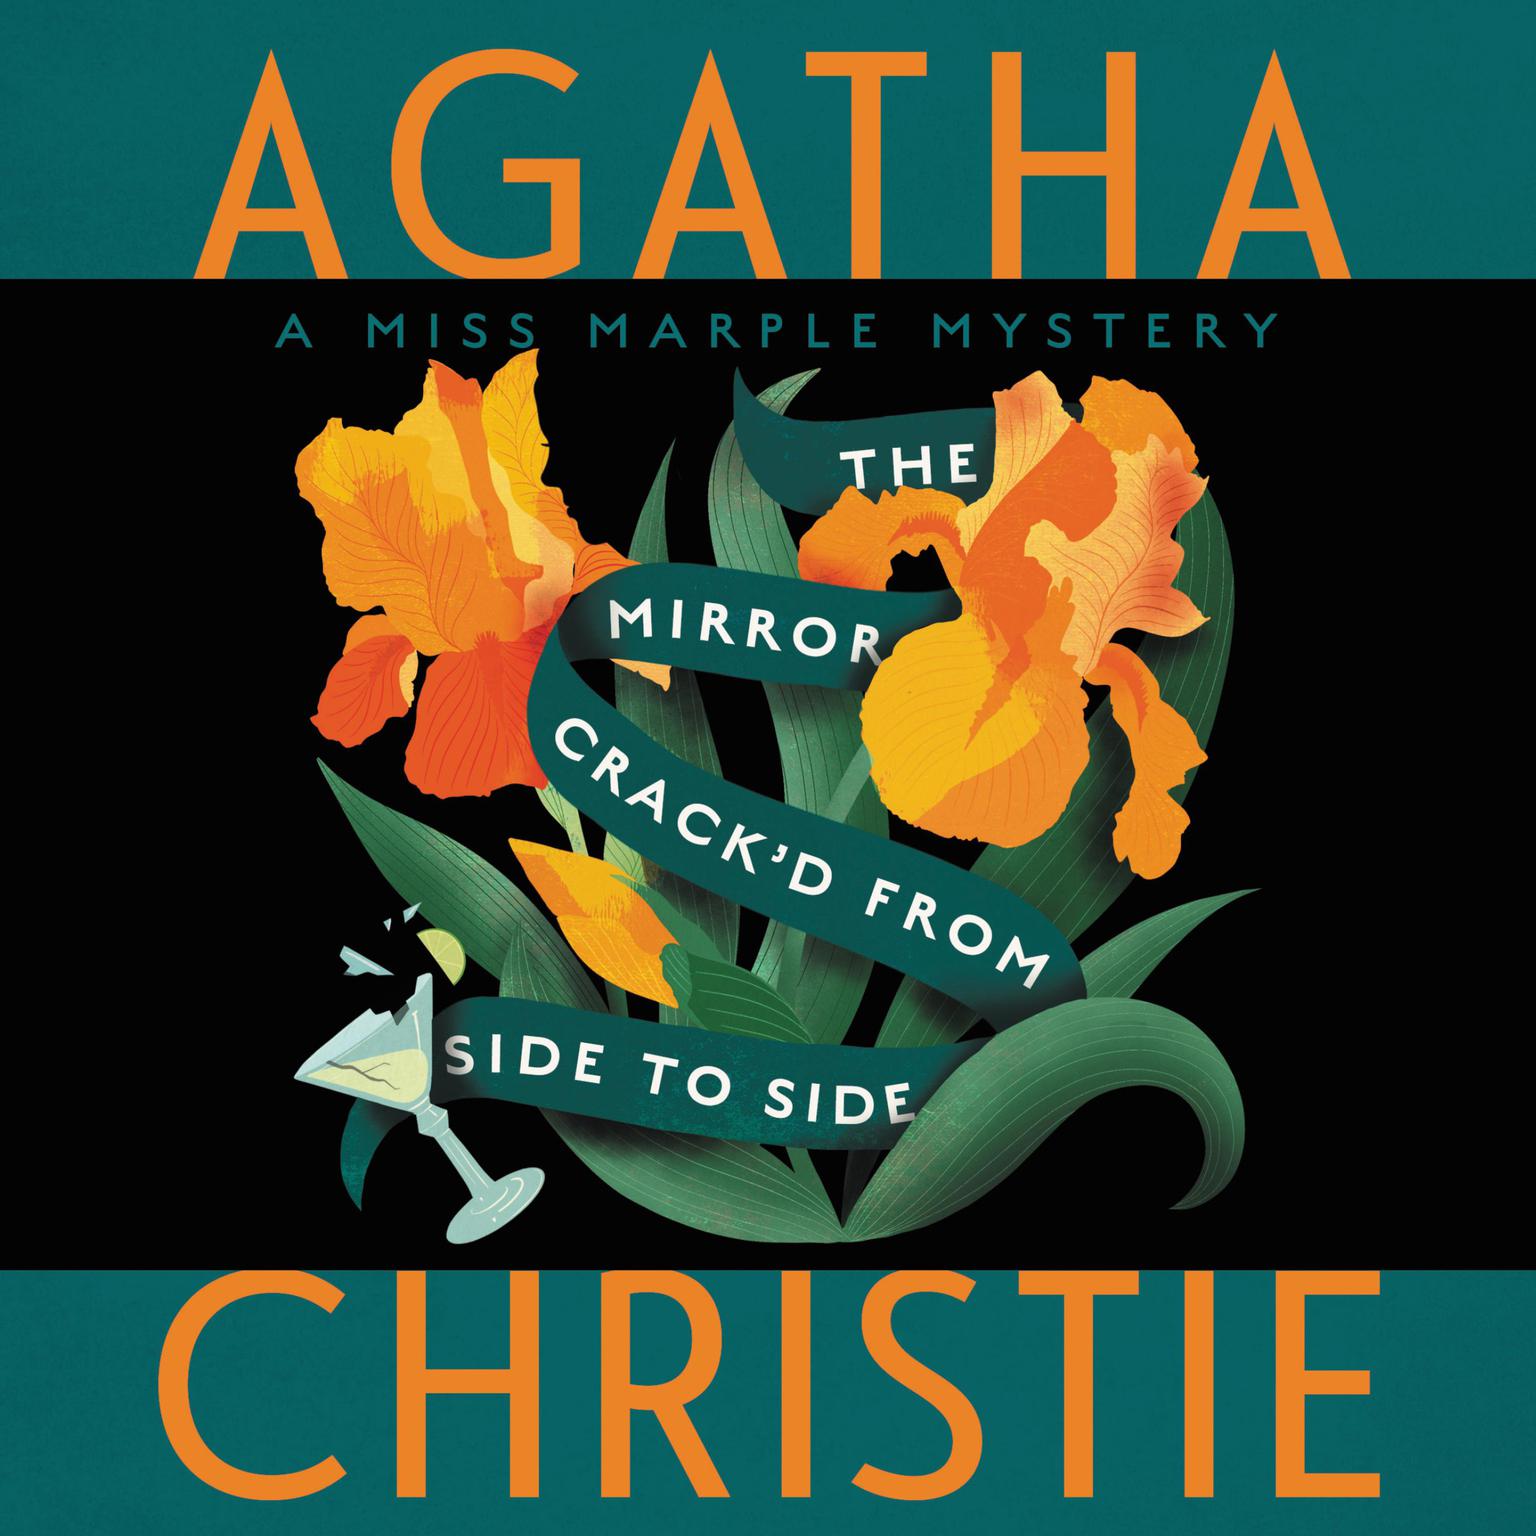 The Mirror Crackd from Side to Side: A Miss Marple Mystery Audiobook, by Agatha Christie